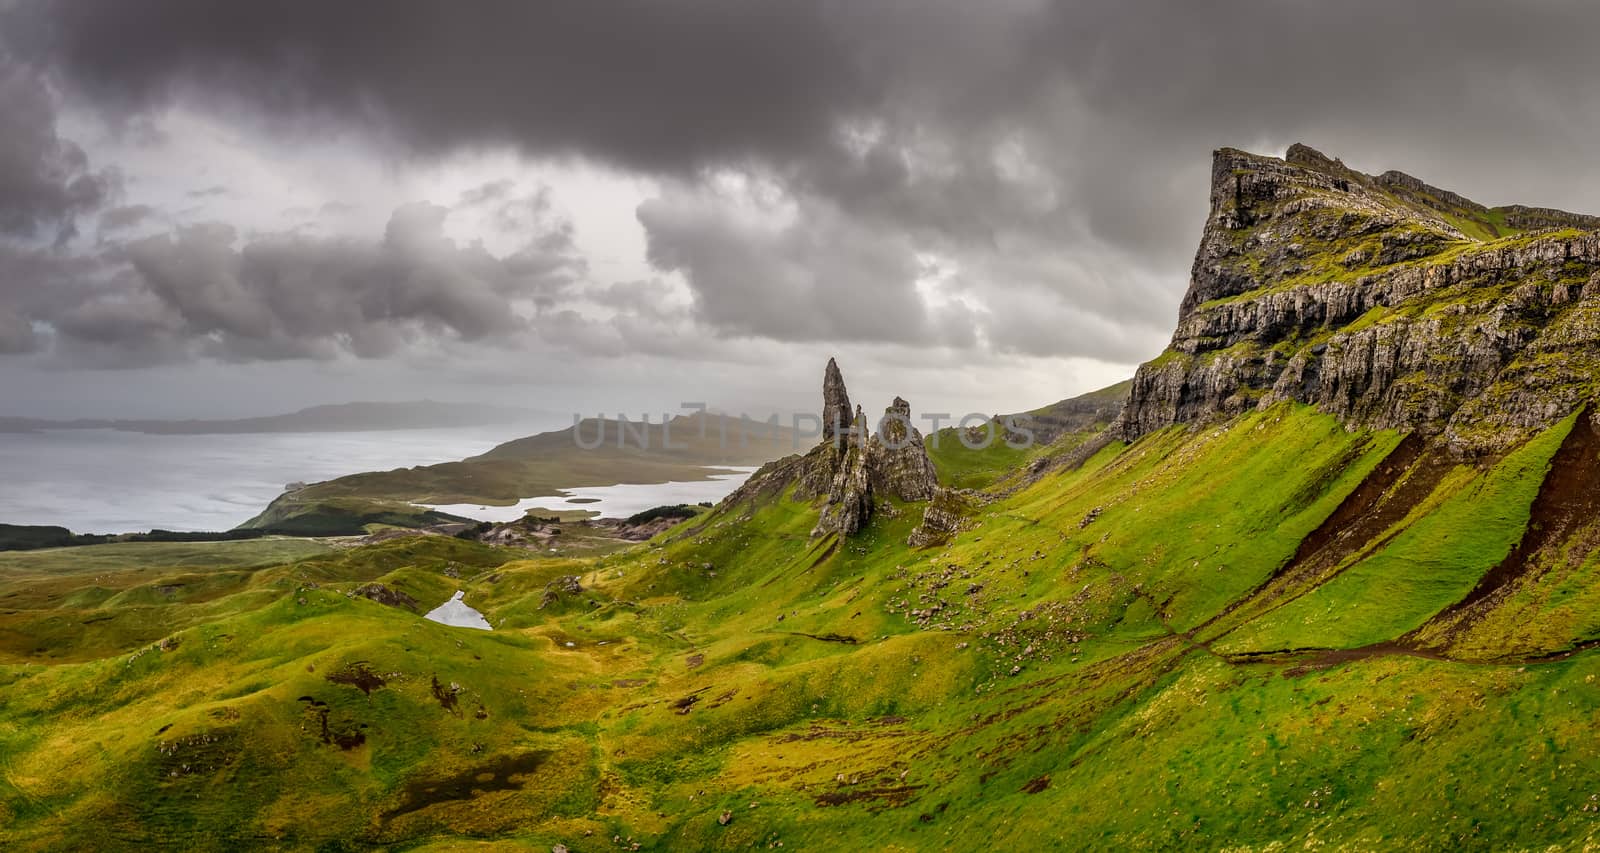 Panoramic view of Old man of Storr mountains, Scottish highlands, United Kingdom